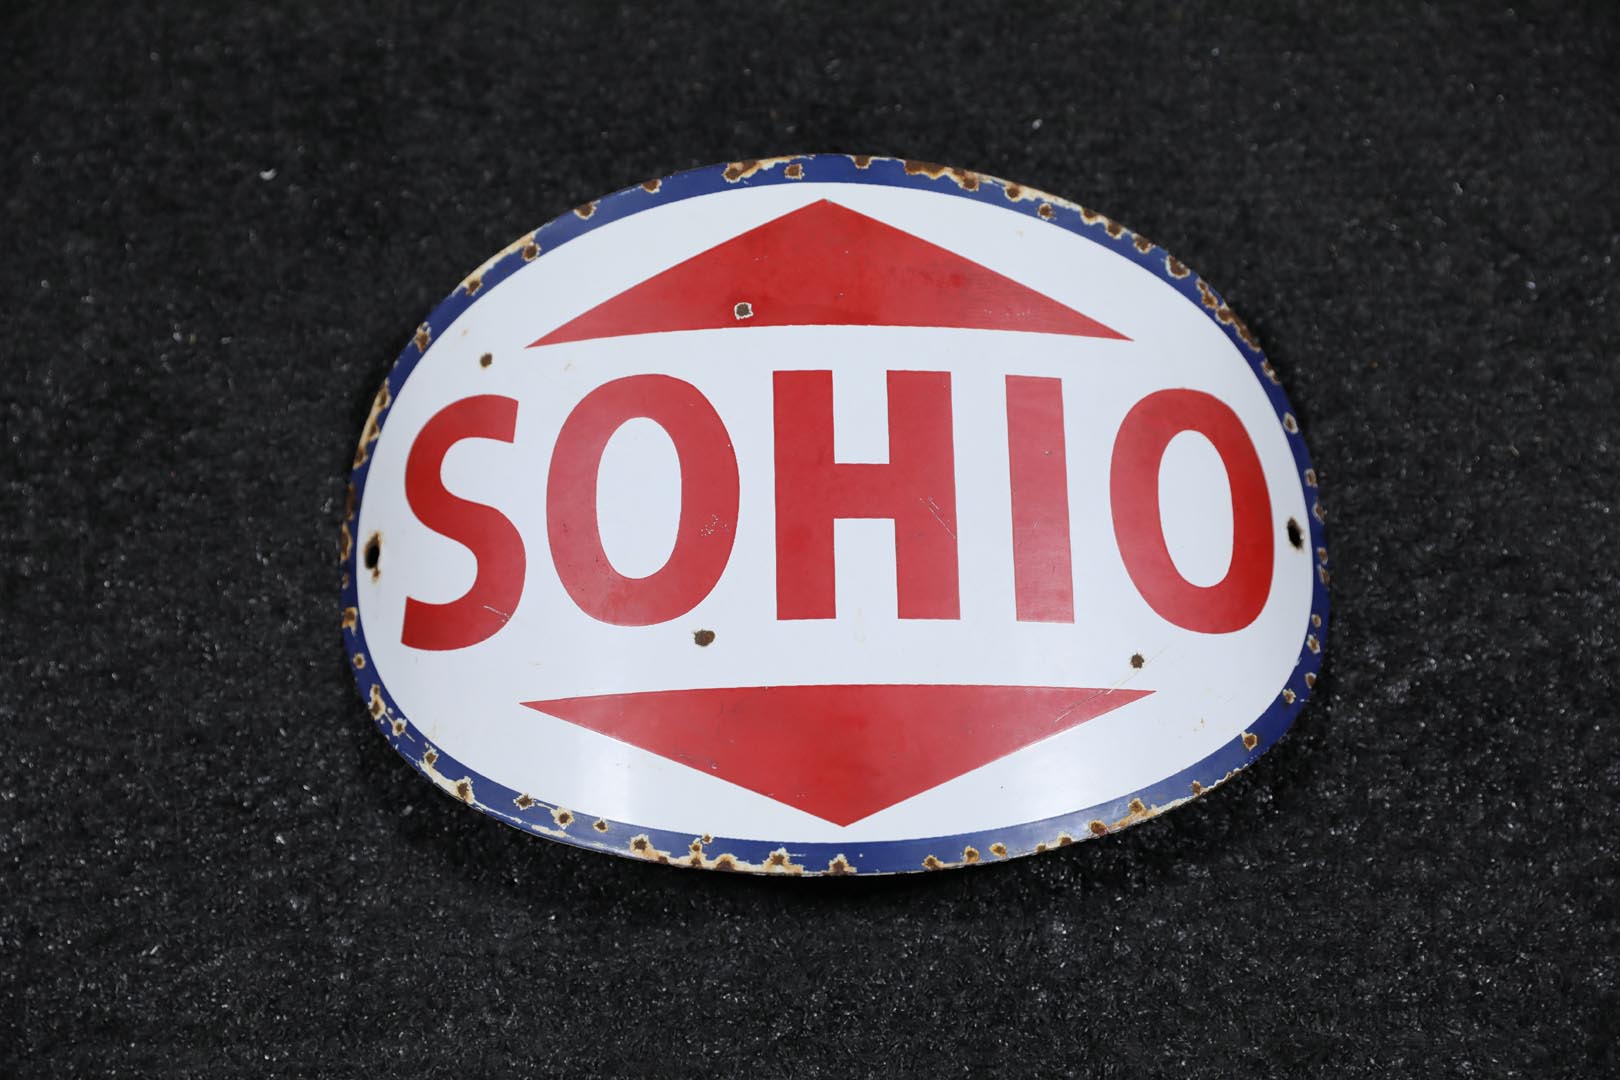  Sohio Gas Single-Sided Porcela in Pump Plate - Curved  